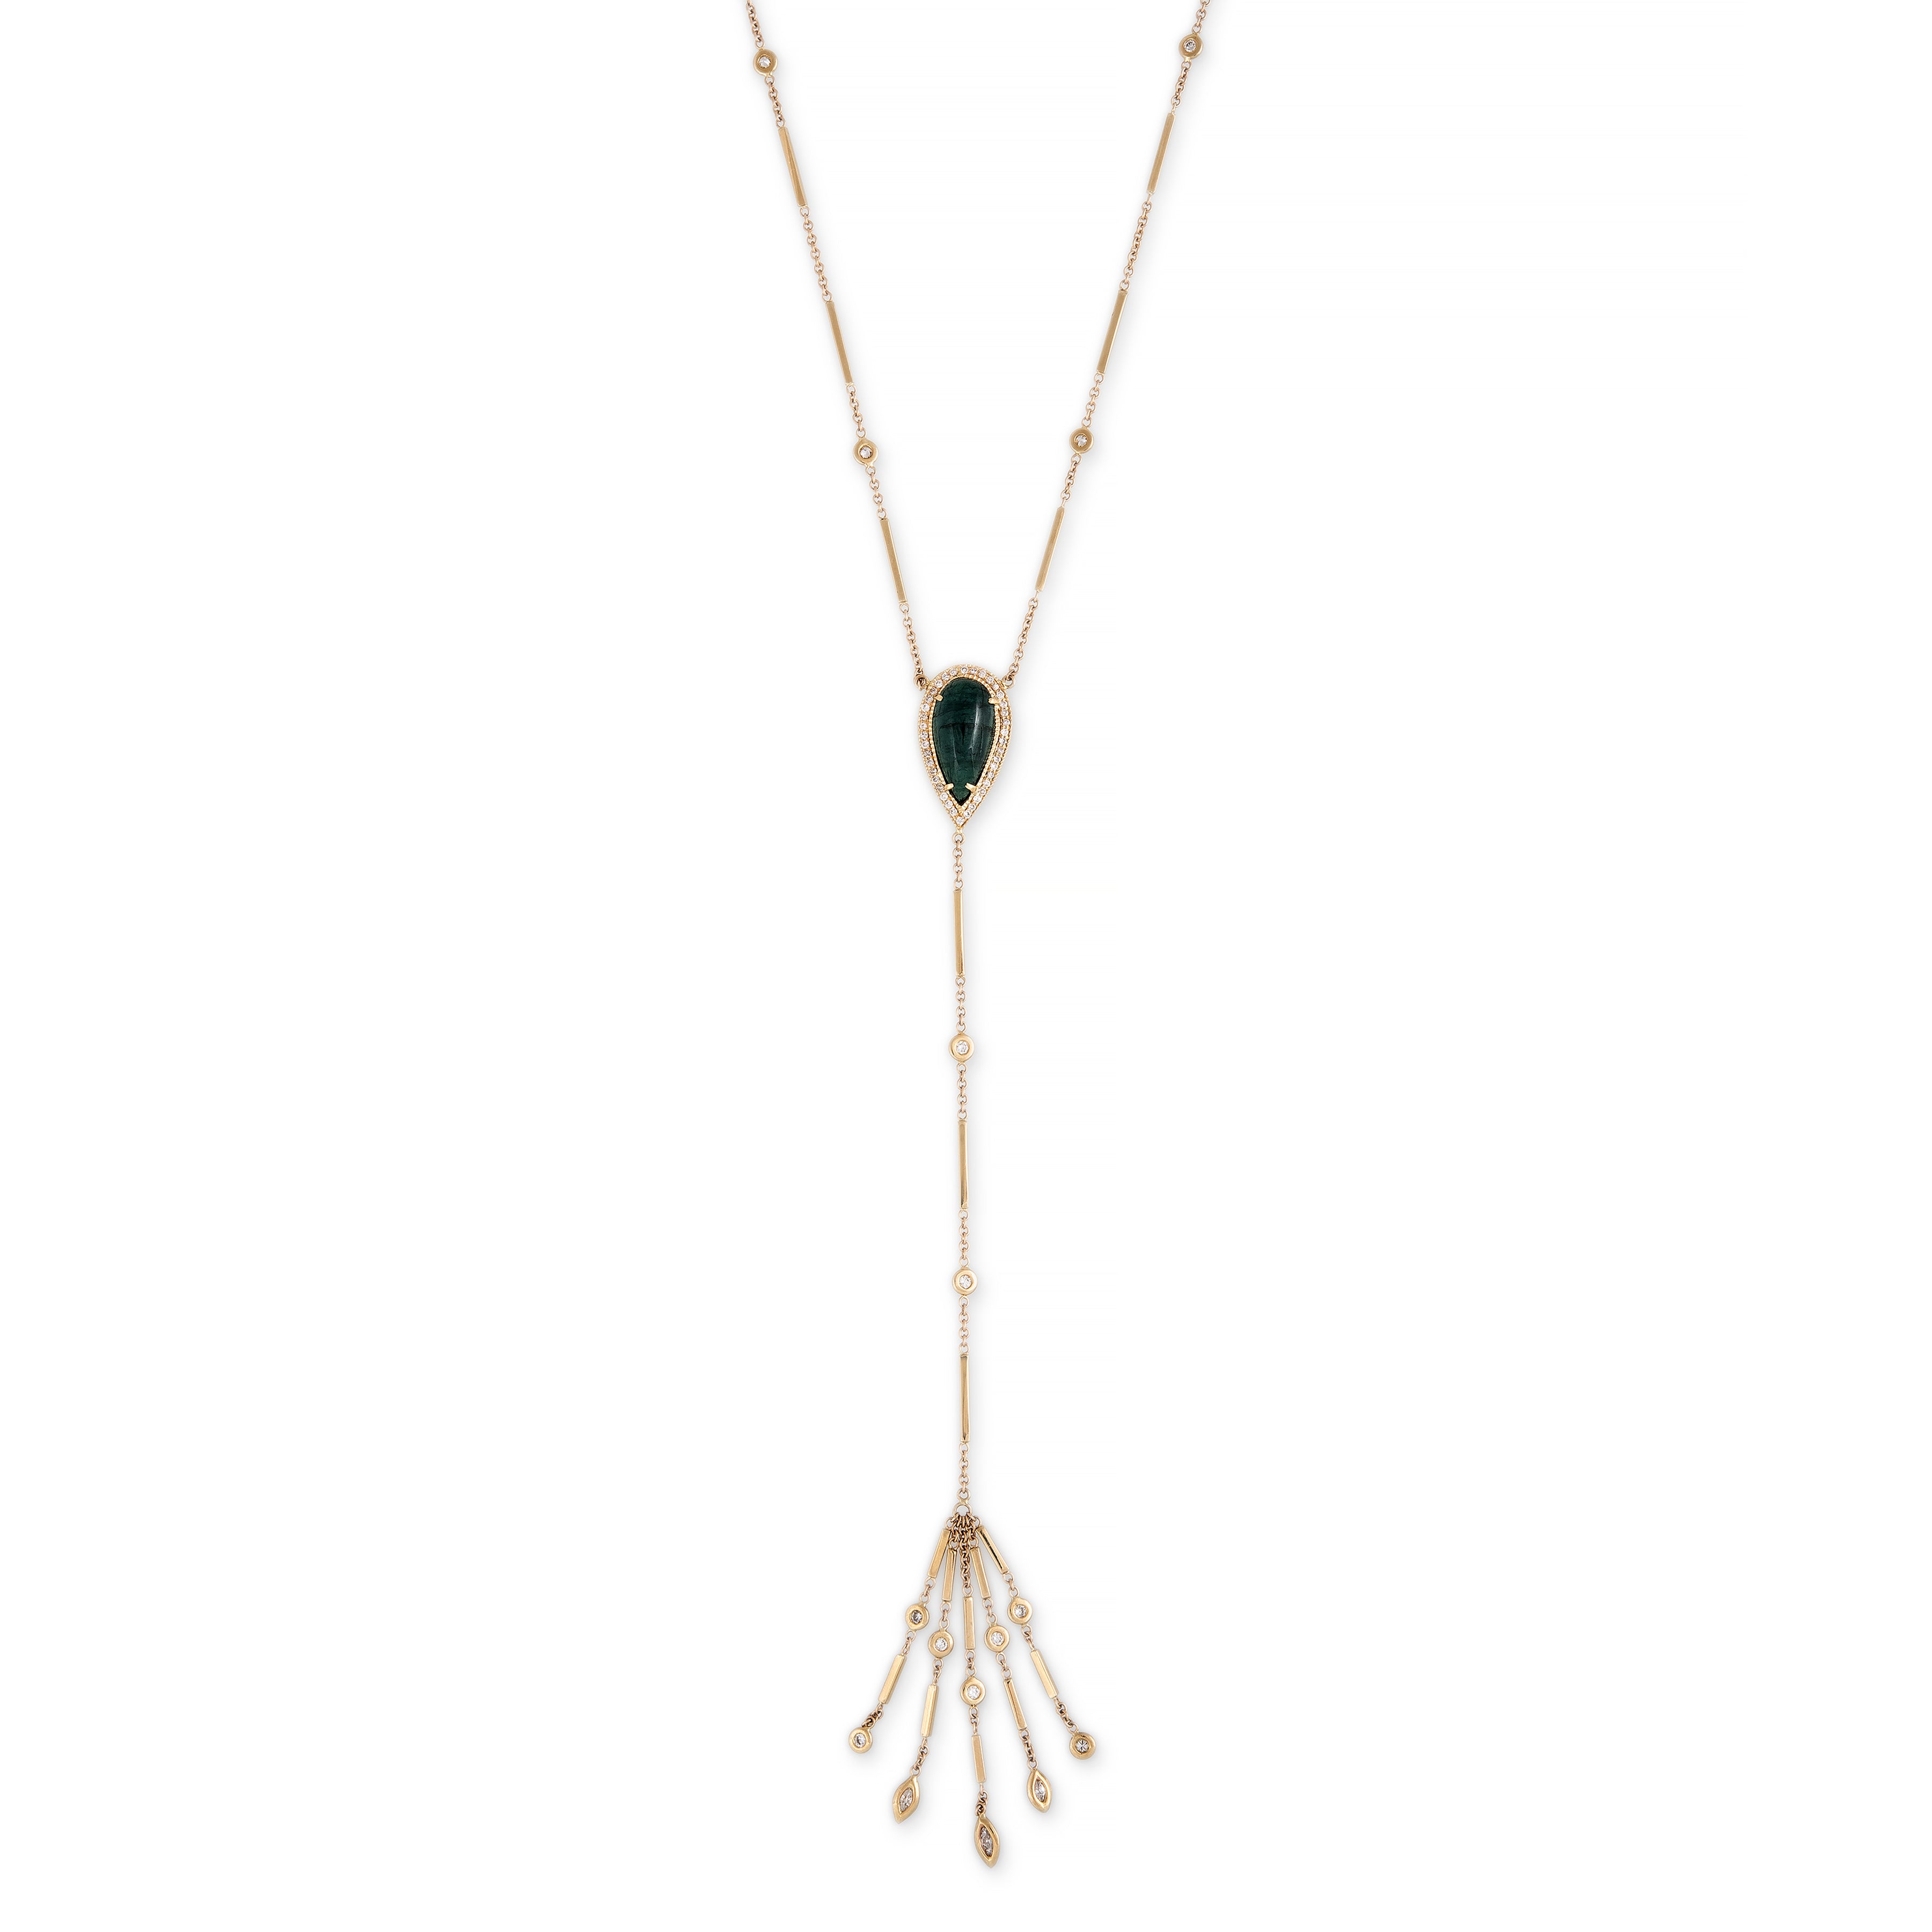 TEAL TOURMALINE SHAKER Y NECKLACE